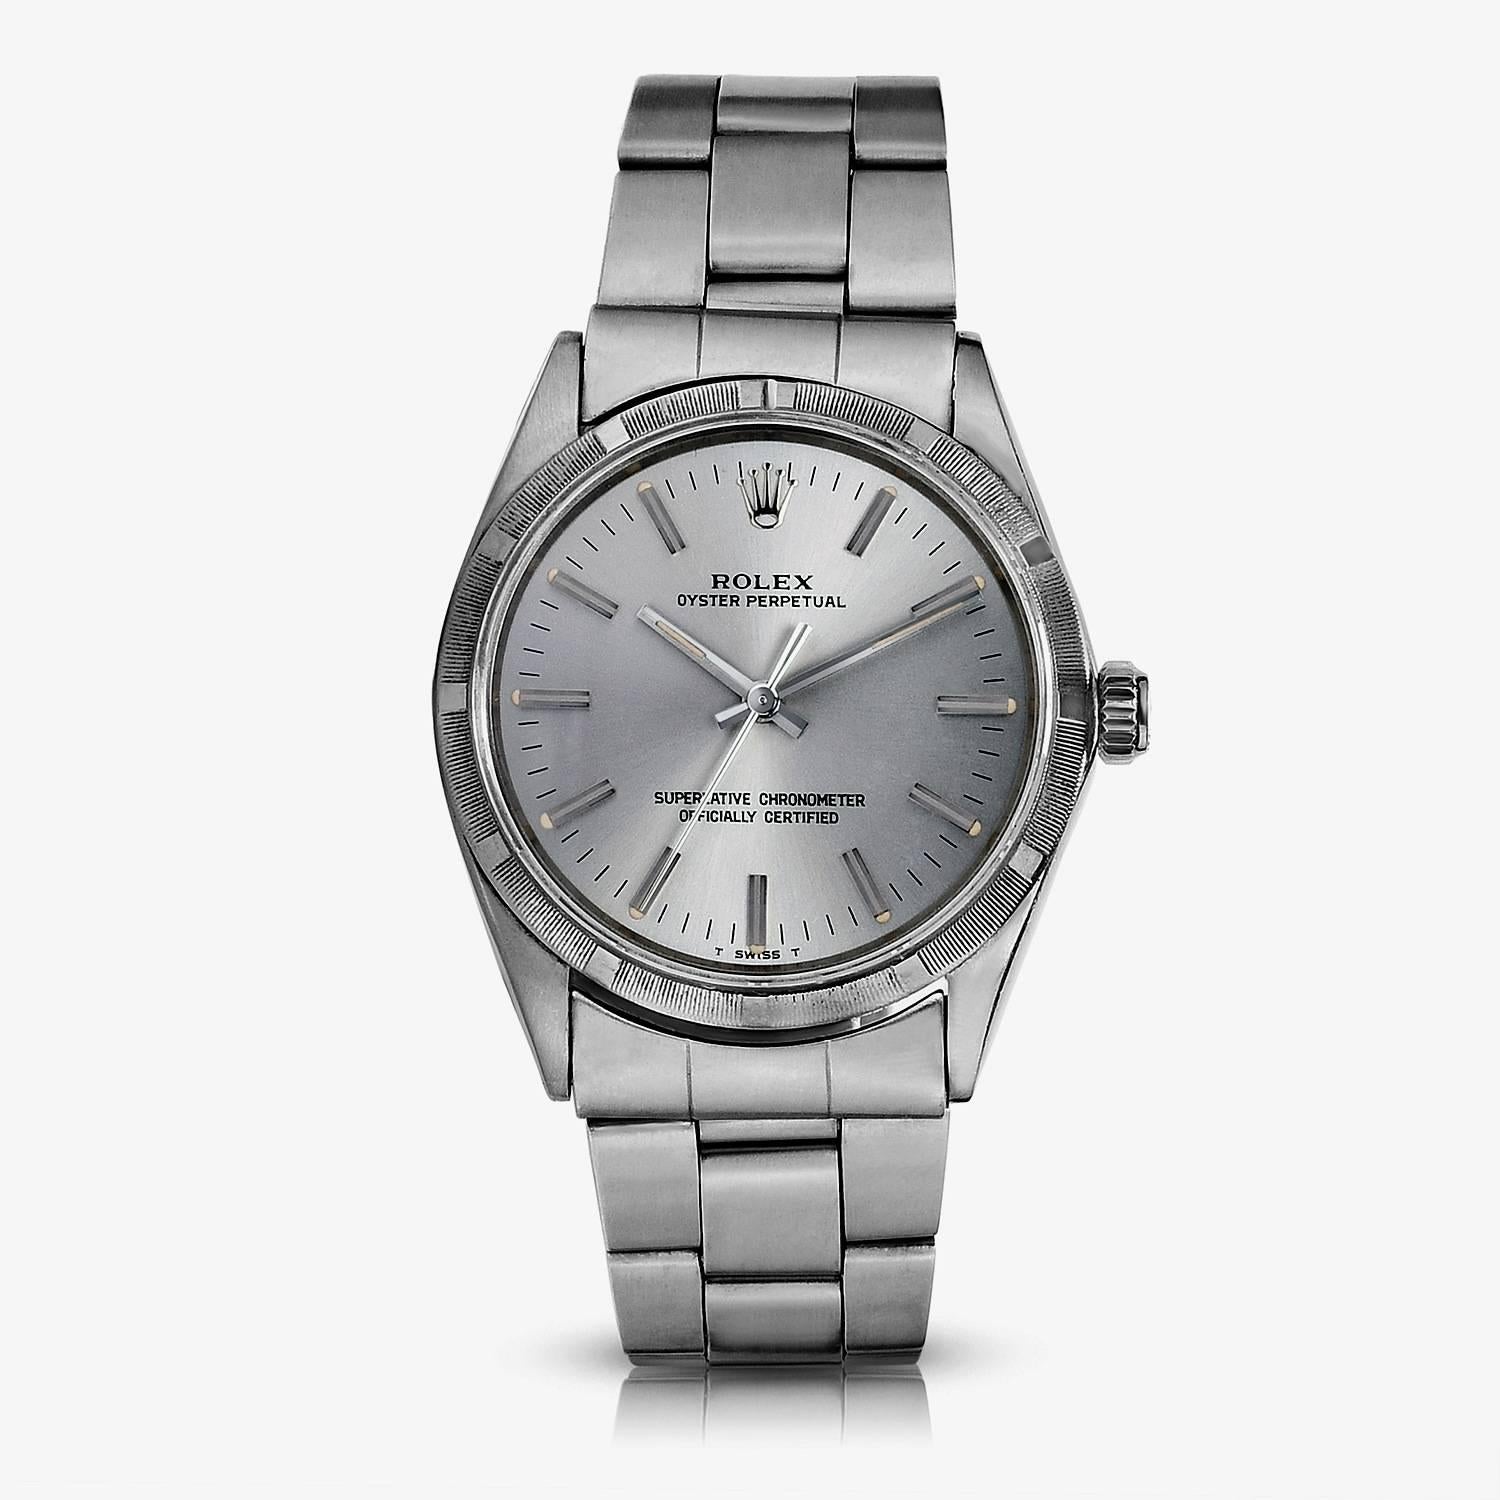 Rolex Stainless Steel Oyster Perpetual Wristwatch
Factory Silver/Grey Dial
Stainless Steel Engine-Turned Bezel
34mm in size 
Rolex Automatic Movement
Acrylic Crystal
Late 1960s Produciton
Comes Fitted on Original Rolex Stainless Steel Folded Link